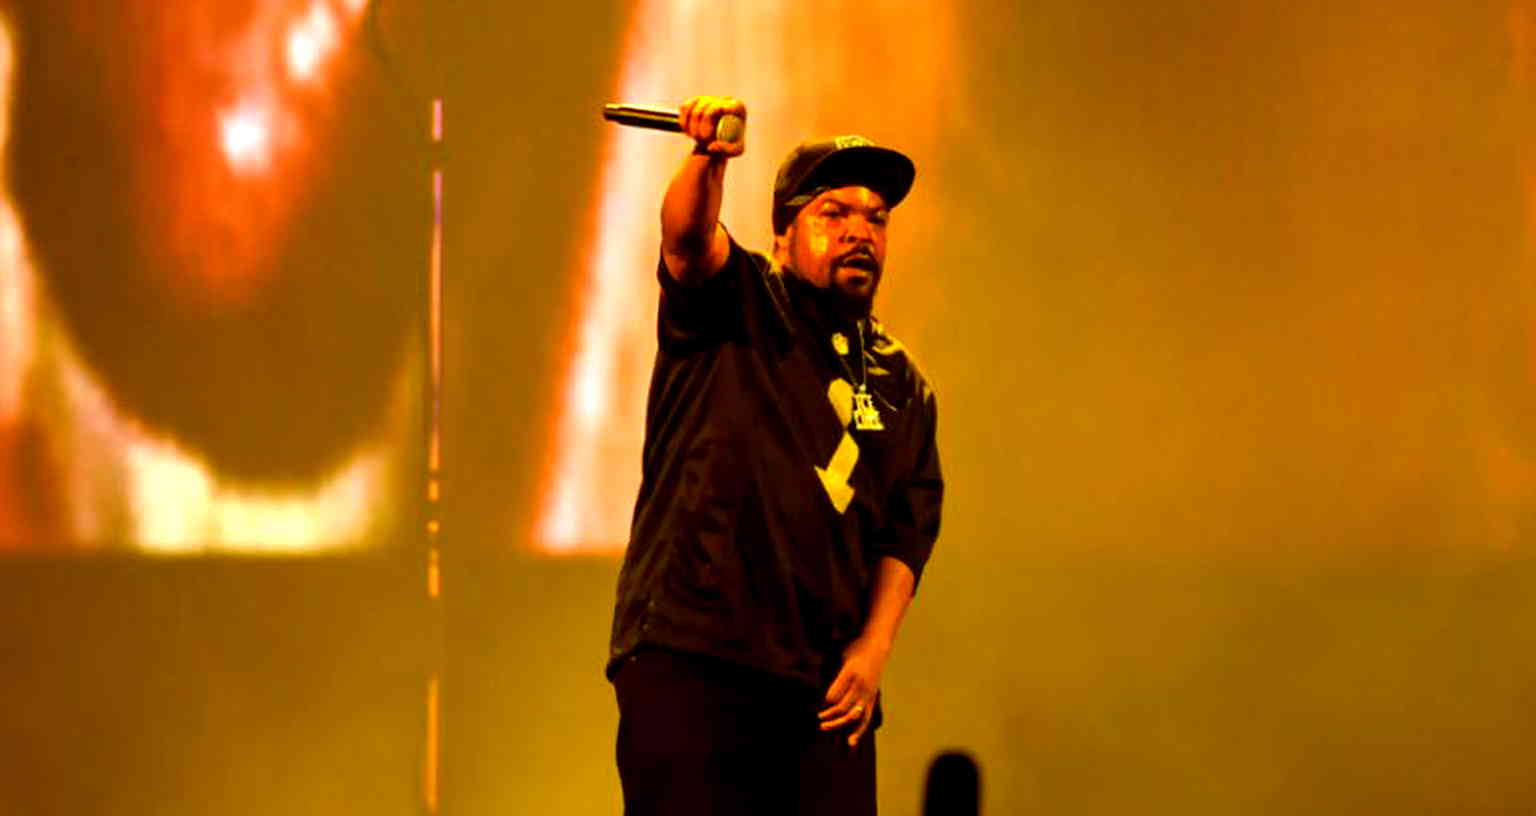 Ice Cube’s alleged anti-Asian, anti-Semitic past resurfaces after news of NFL partnership